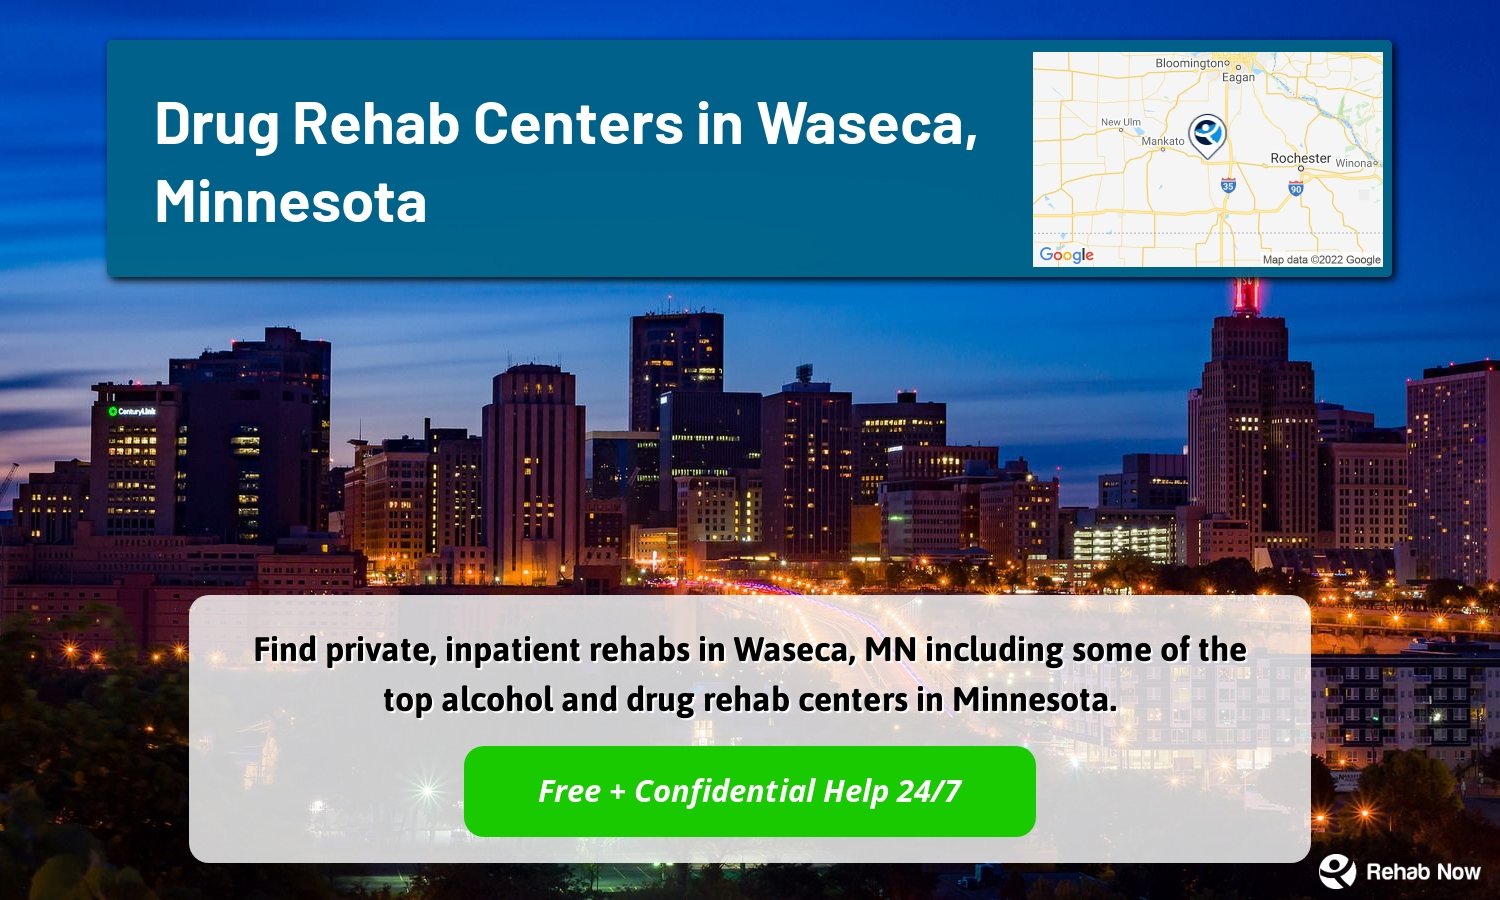 Find private, inpatient rehabs in Waseca, MN including some of the top alcohol and drug rehab centers in Minnesota.